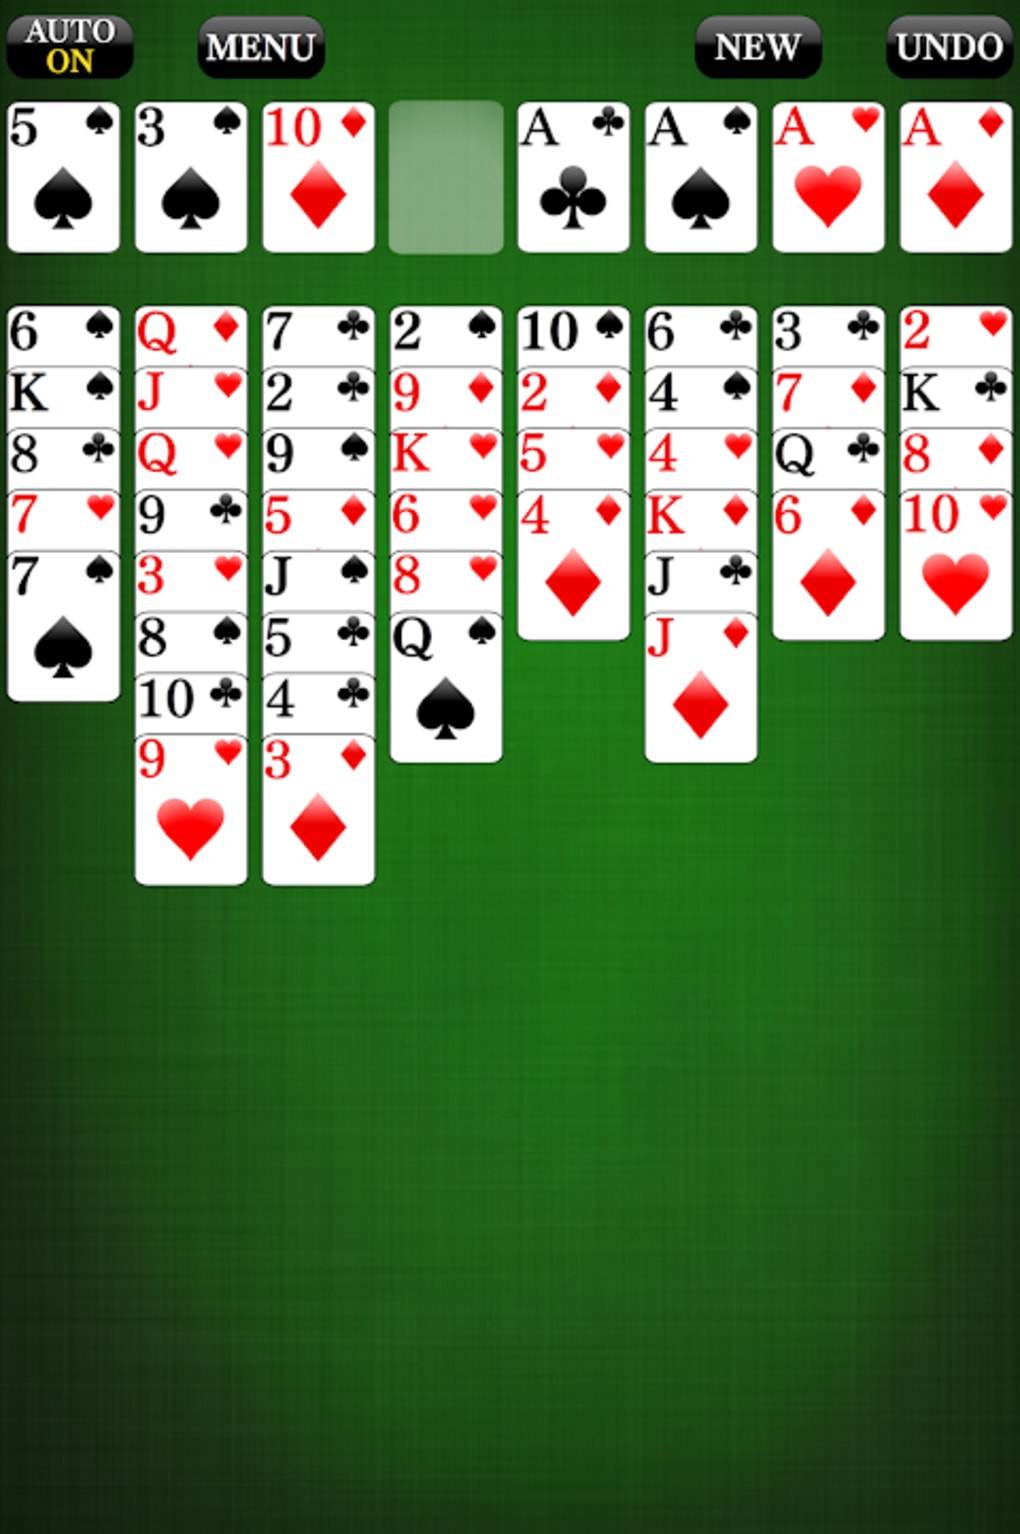 Play FreeCell Solitaire online free. 1-12 players, No ads